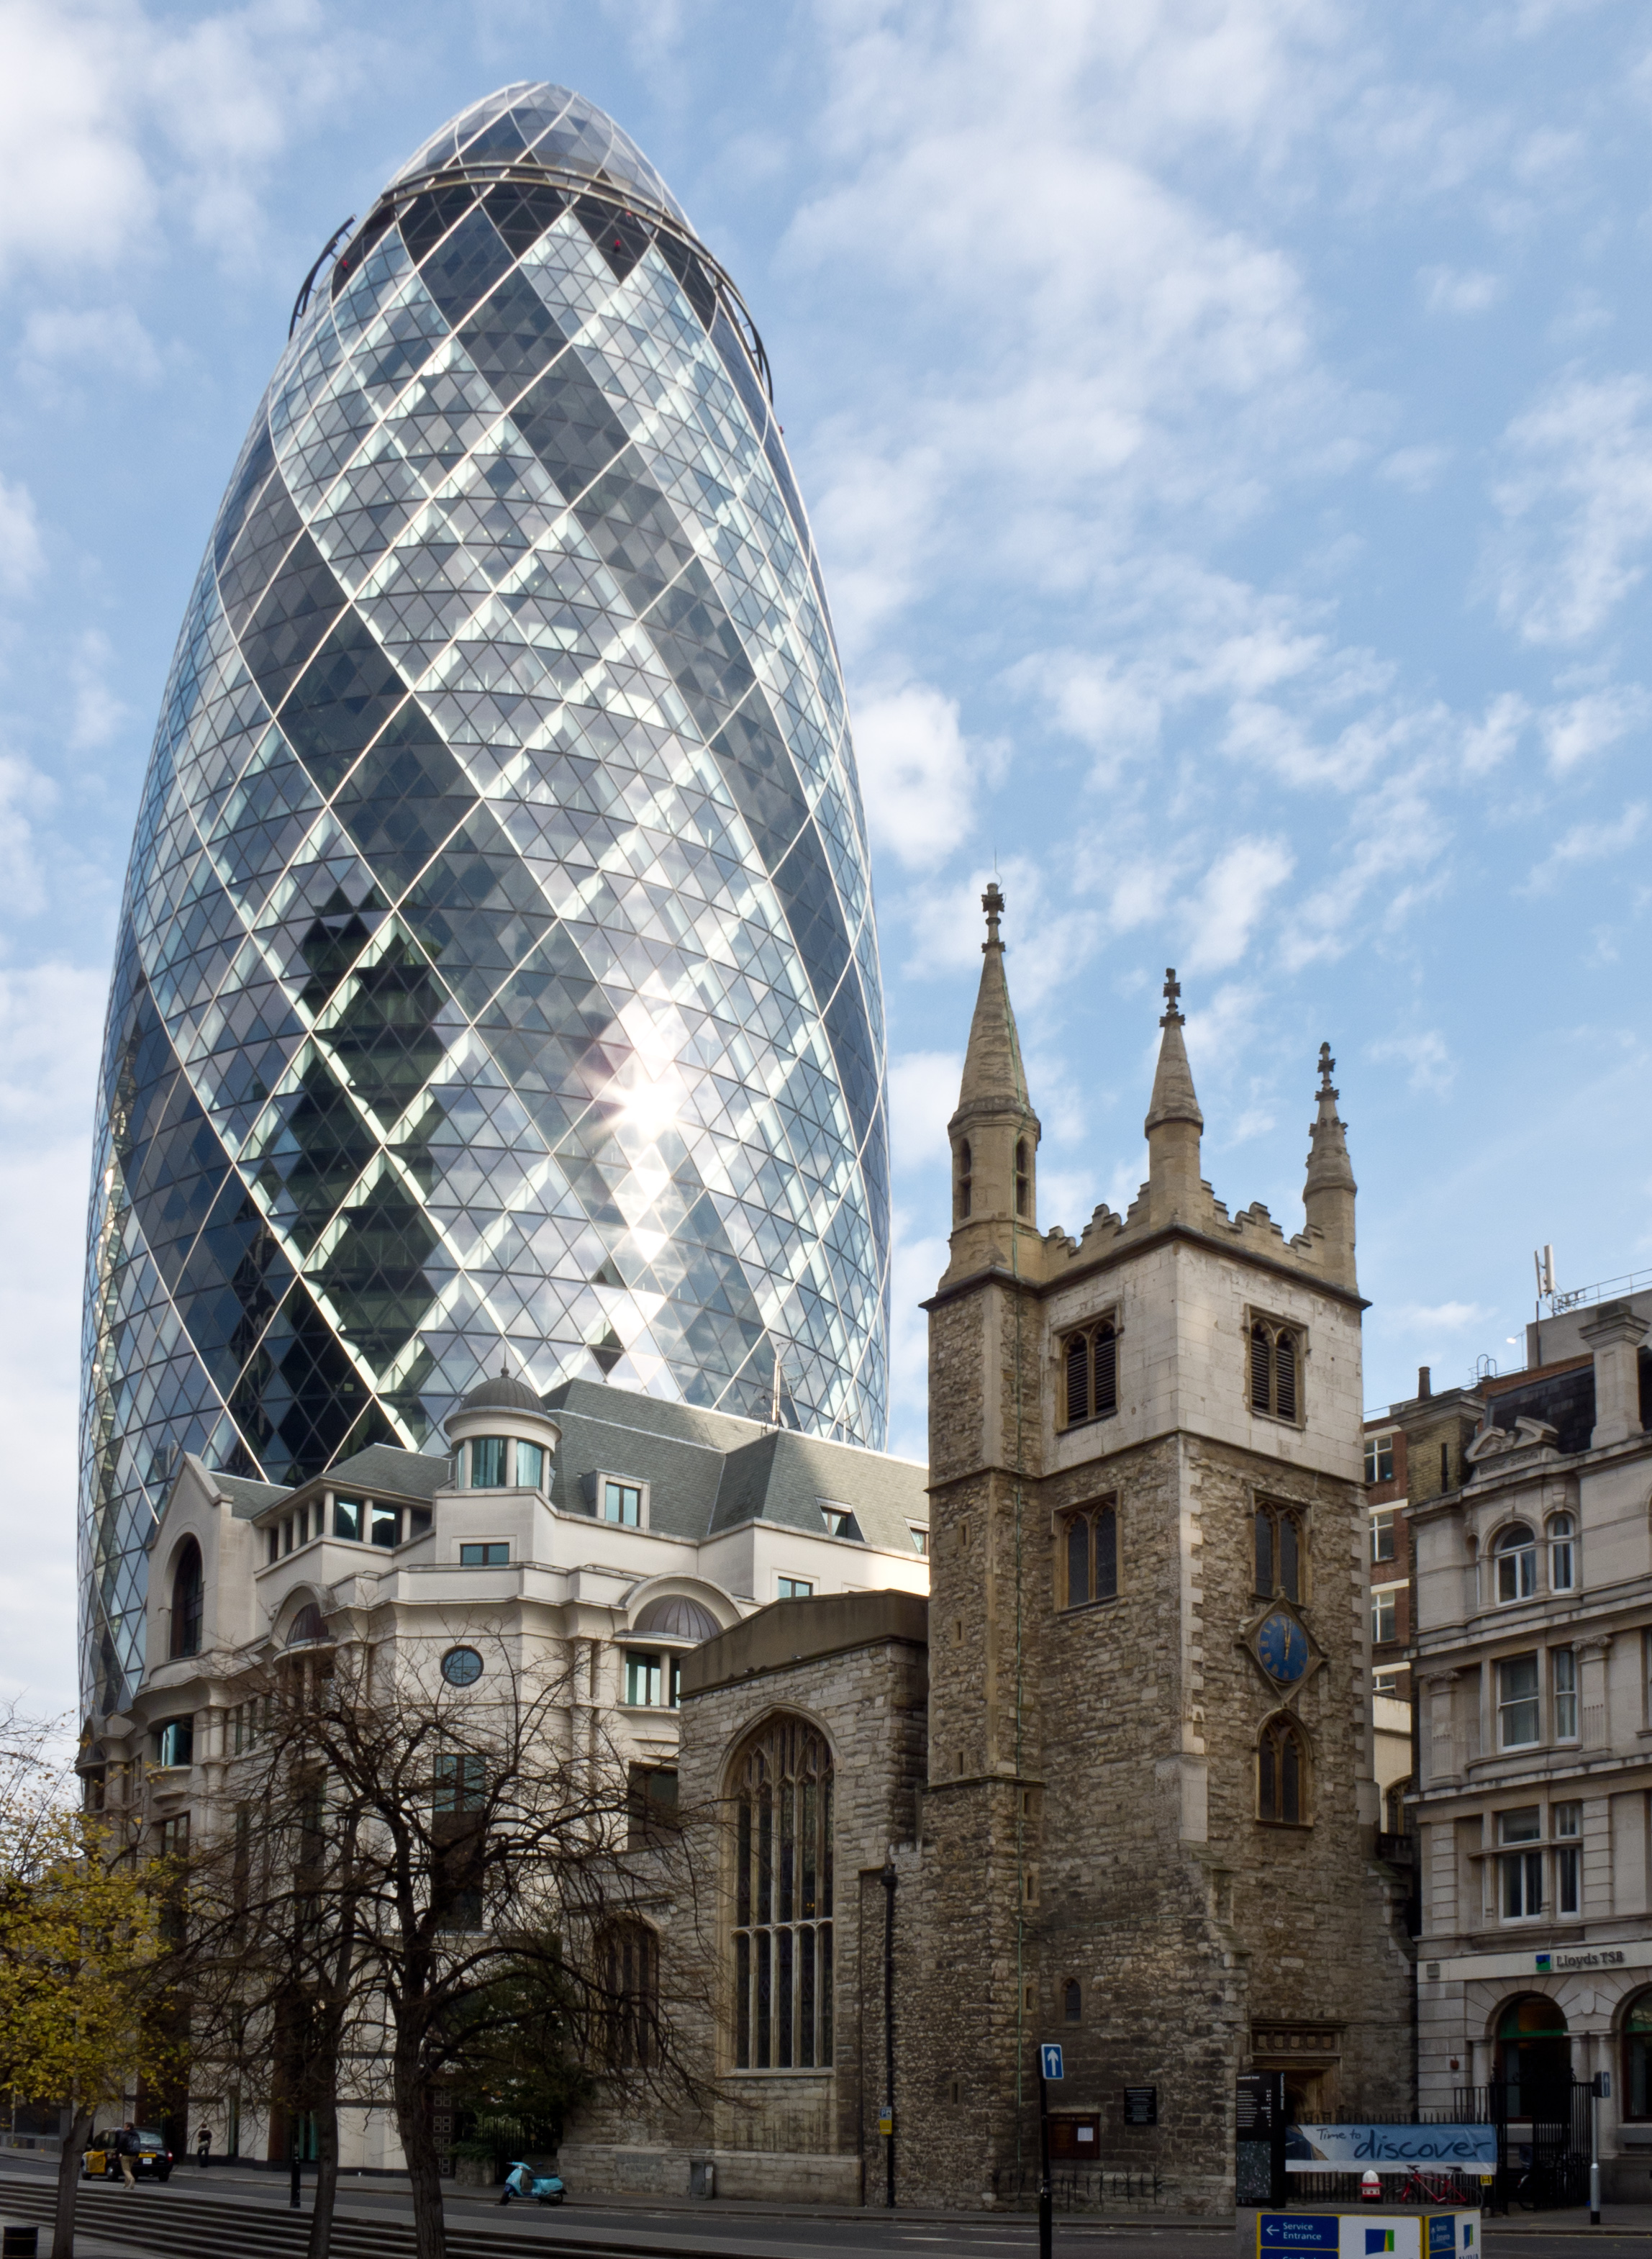 30 St Mary Axe (Swiss Re Building) and St Andrew Undershaft church